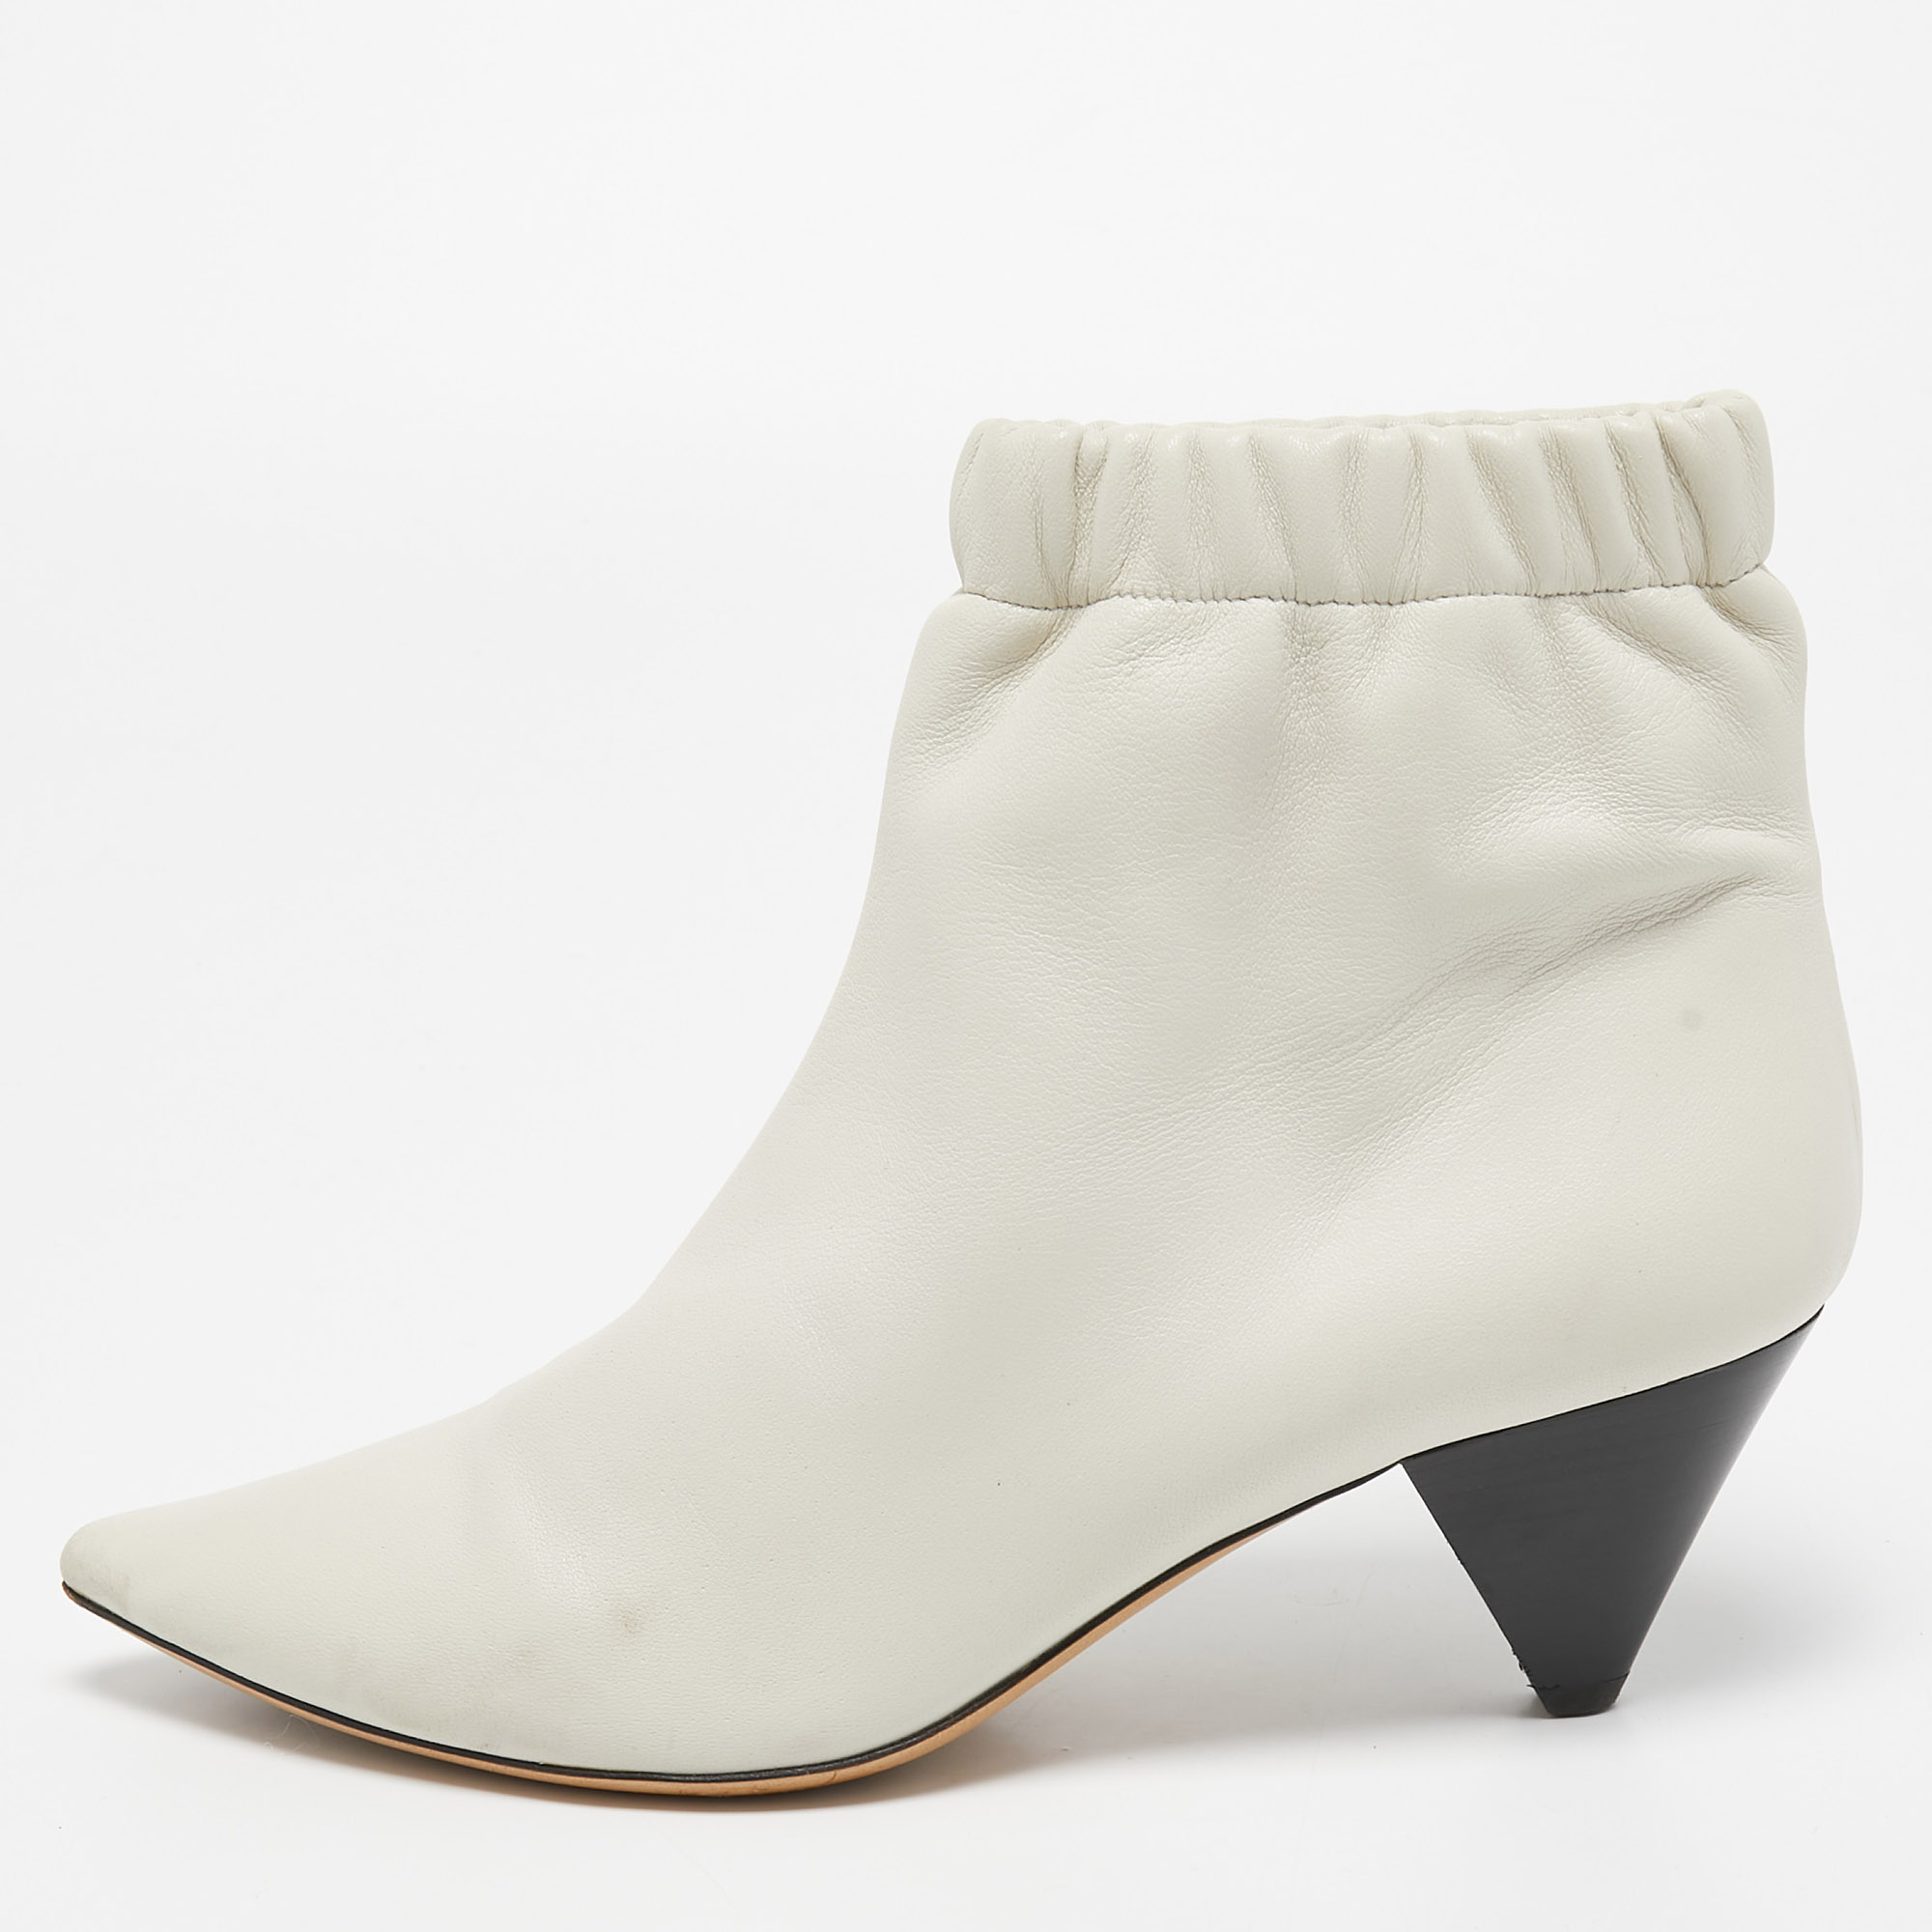 Isabel marant white leather pointed toe ankle boots size 38